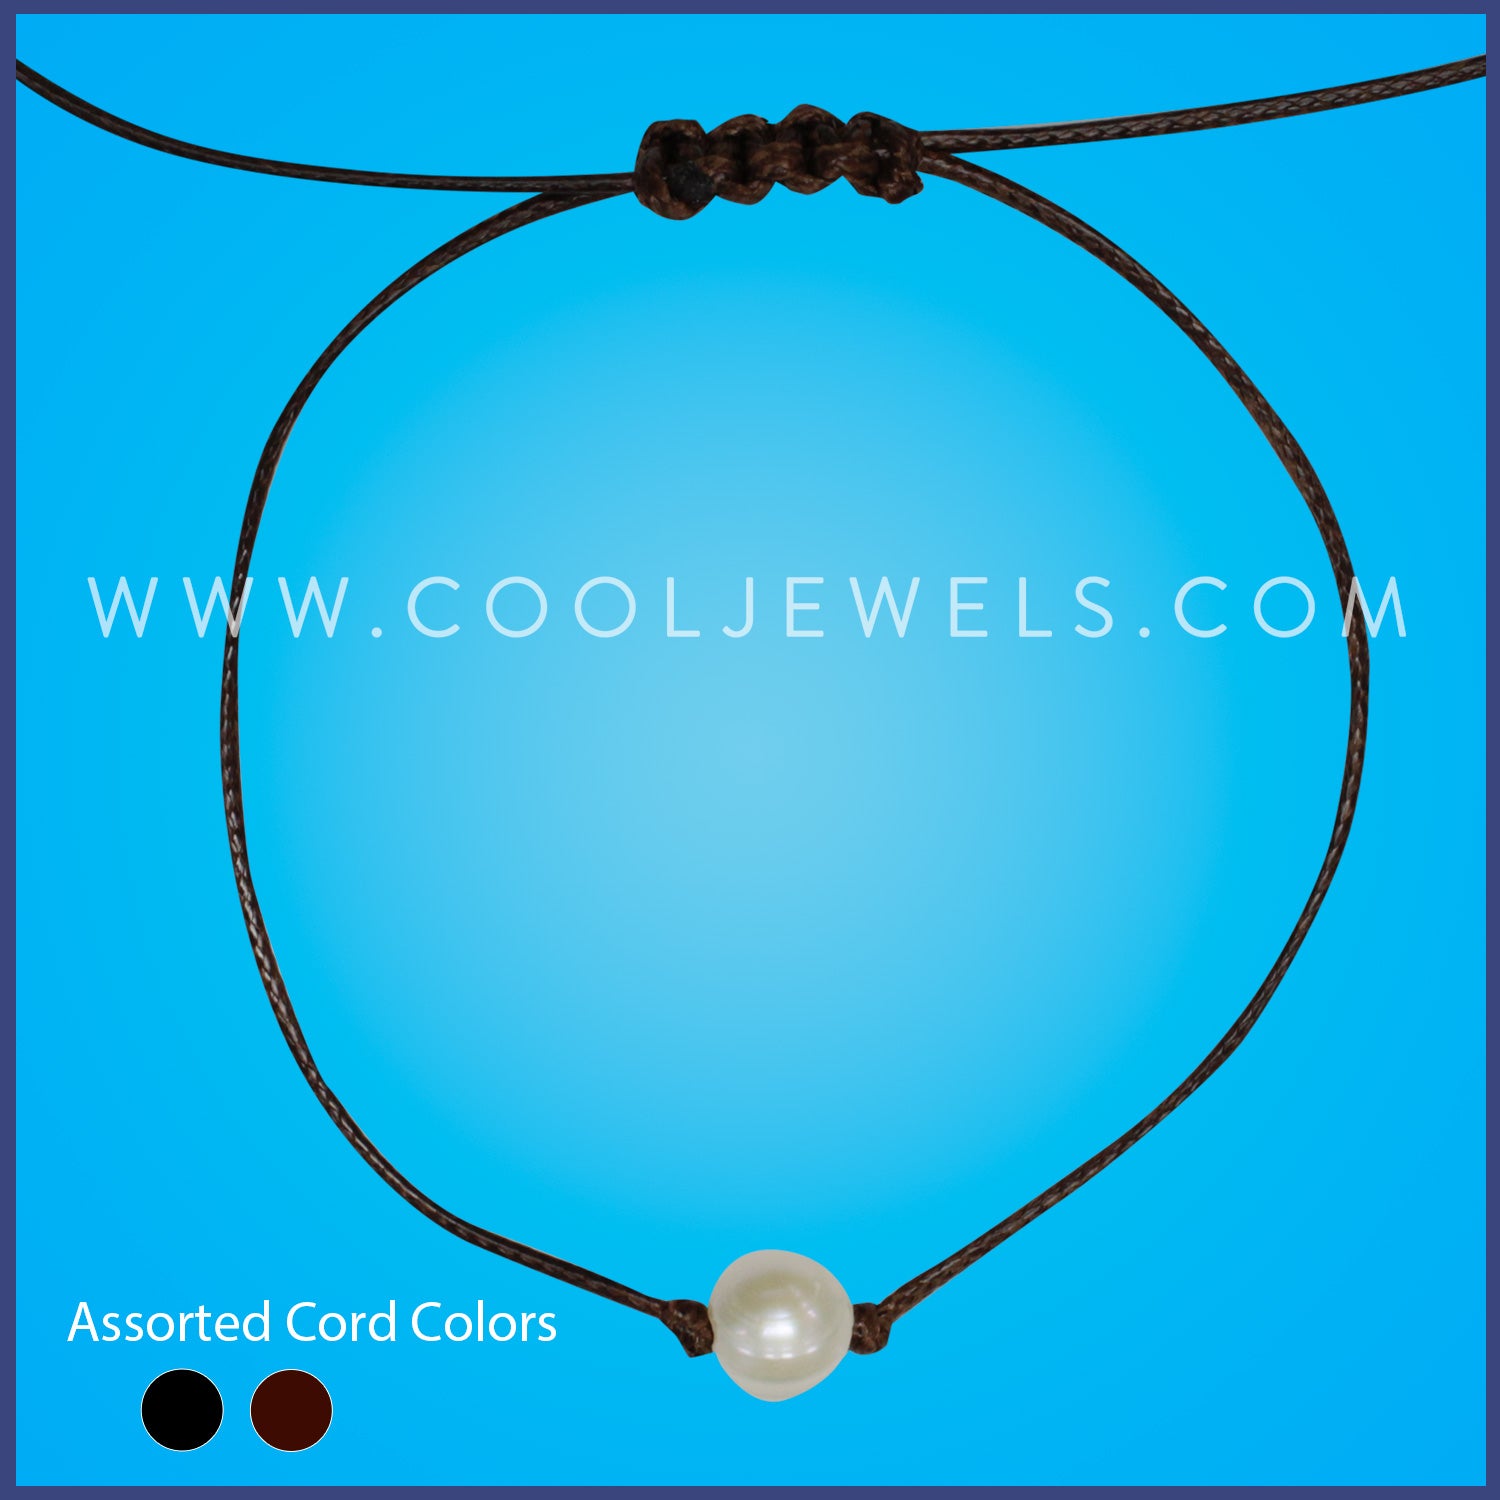 WAX CORD SLIDER ANKLET WITH FRESH WATER PEARL 